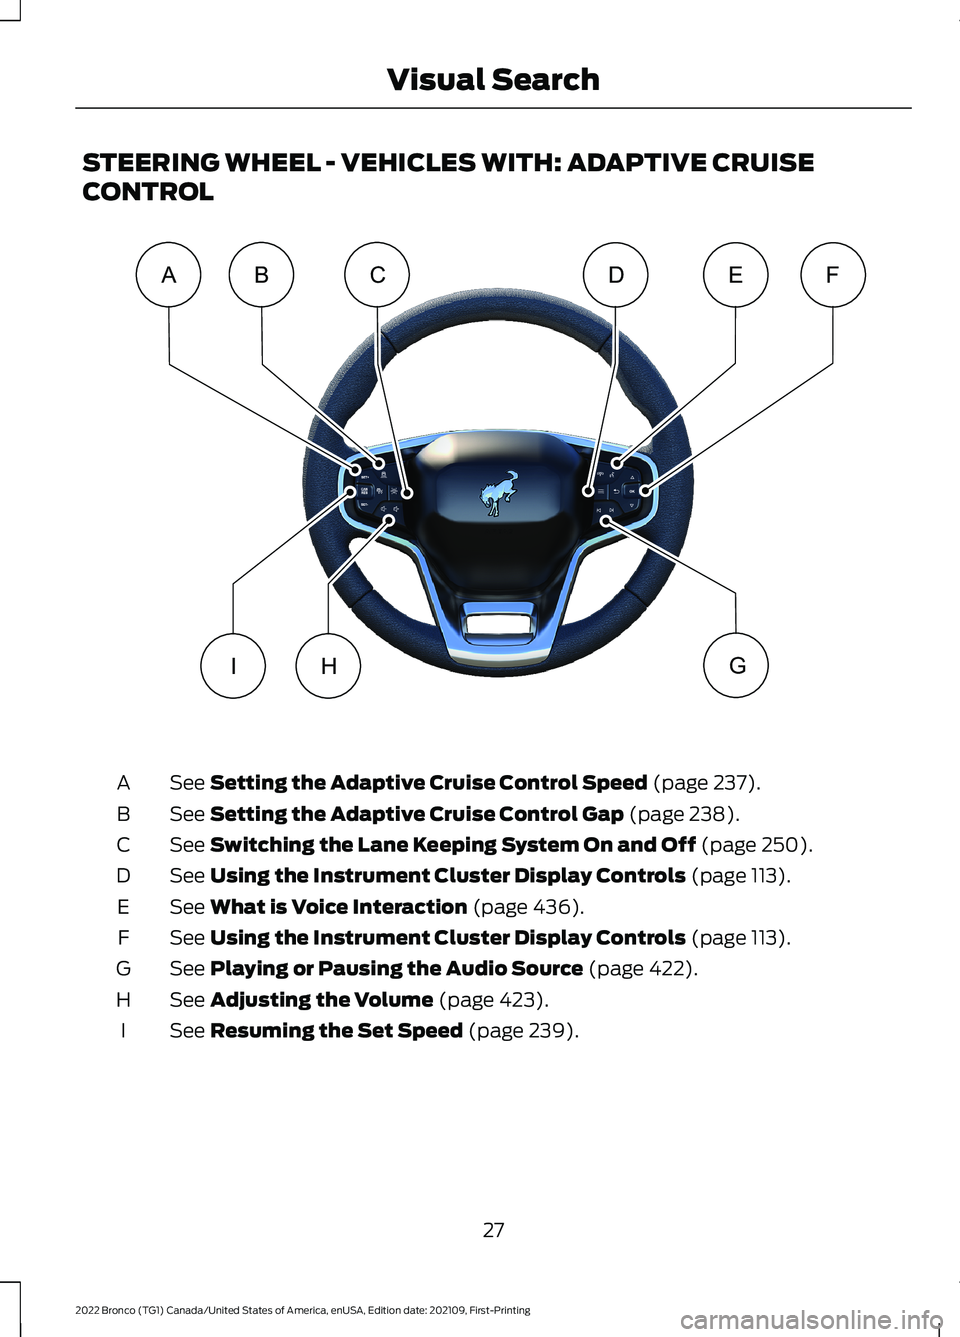 FORD BRONCO 2022  Owners Manual STEERING WHEEL - VEHICLES WITH: ADAPTIVE CRUISE
CONTROL
See Setting the Adaptive Cruise Control Speed (page 237).A
See Setting the Adaptive Cruise Control Gap (page 238).B
See Switching the Lane Keepi